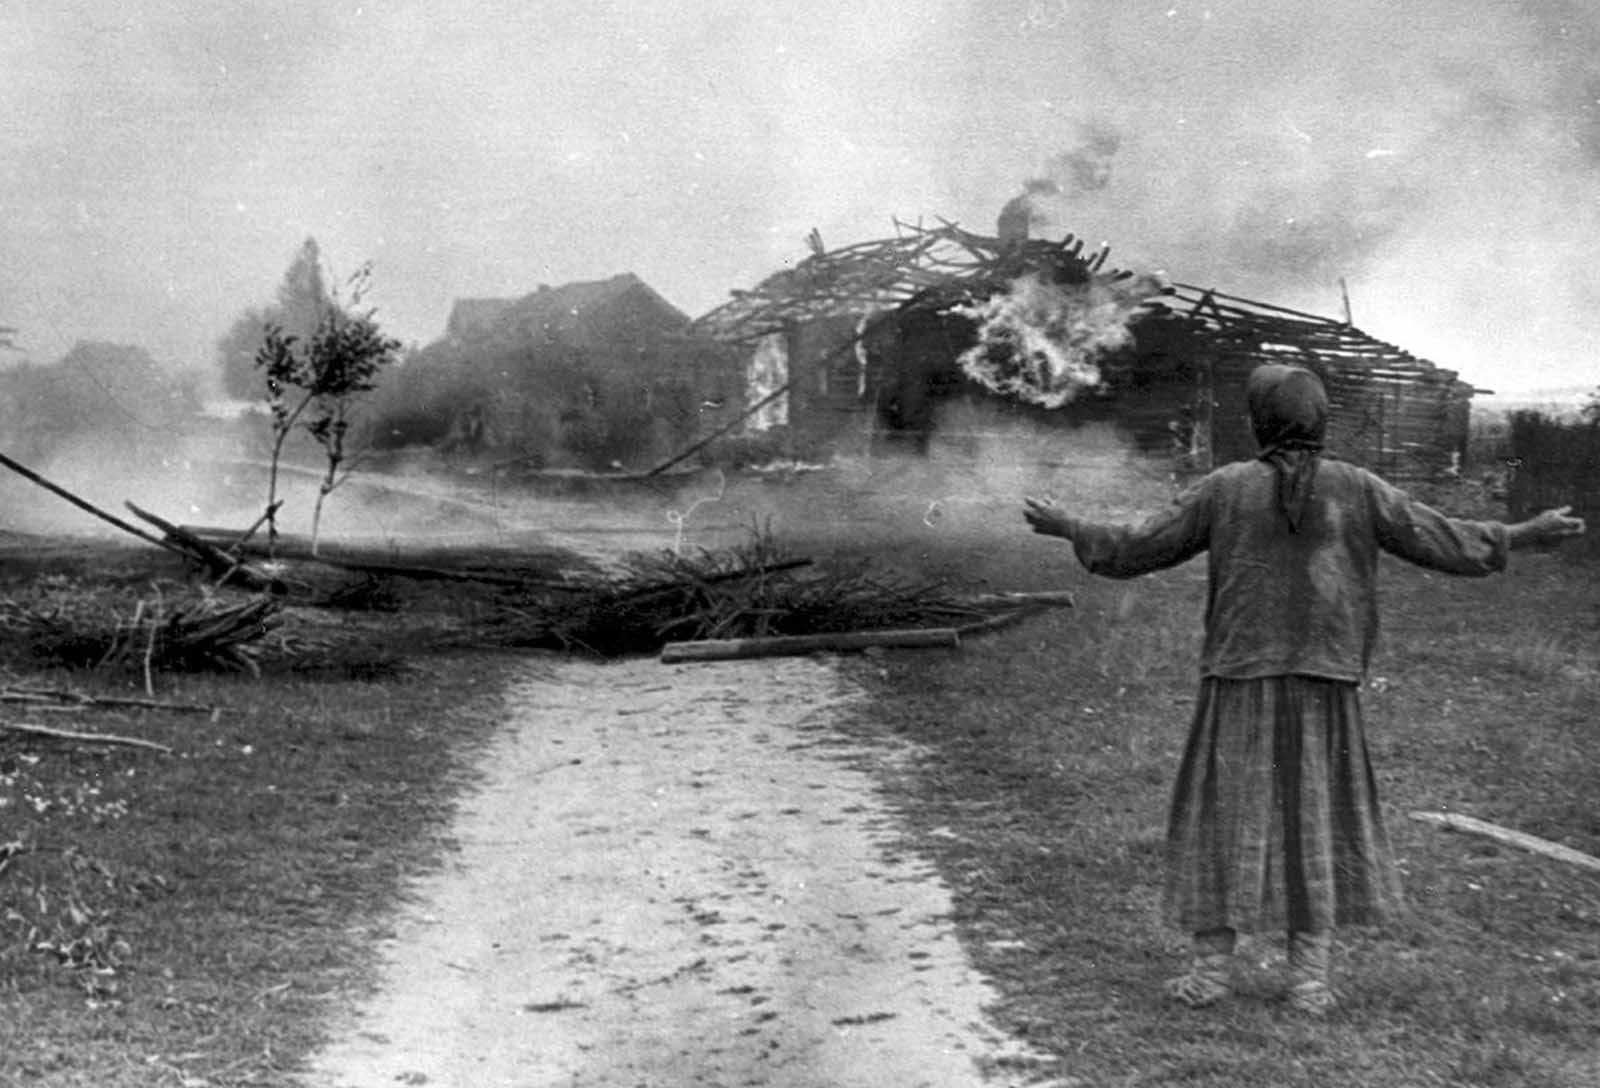 A Russian woman watches building burn sometime in 1942.